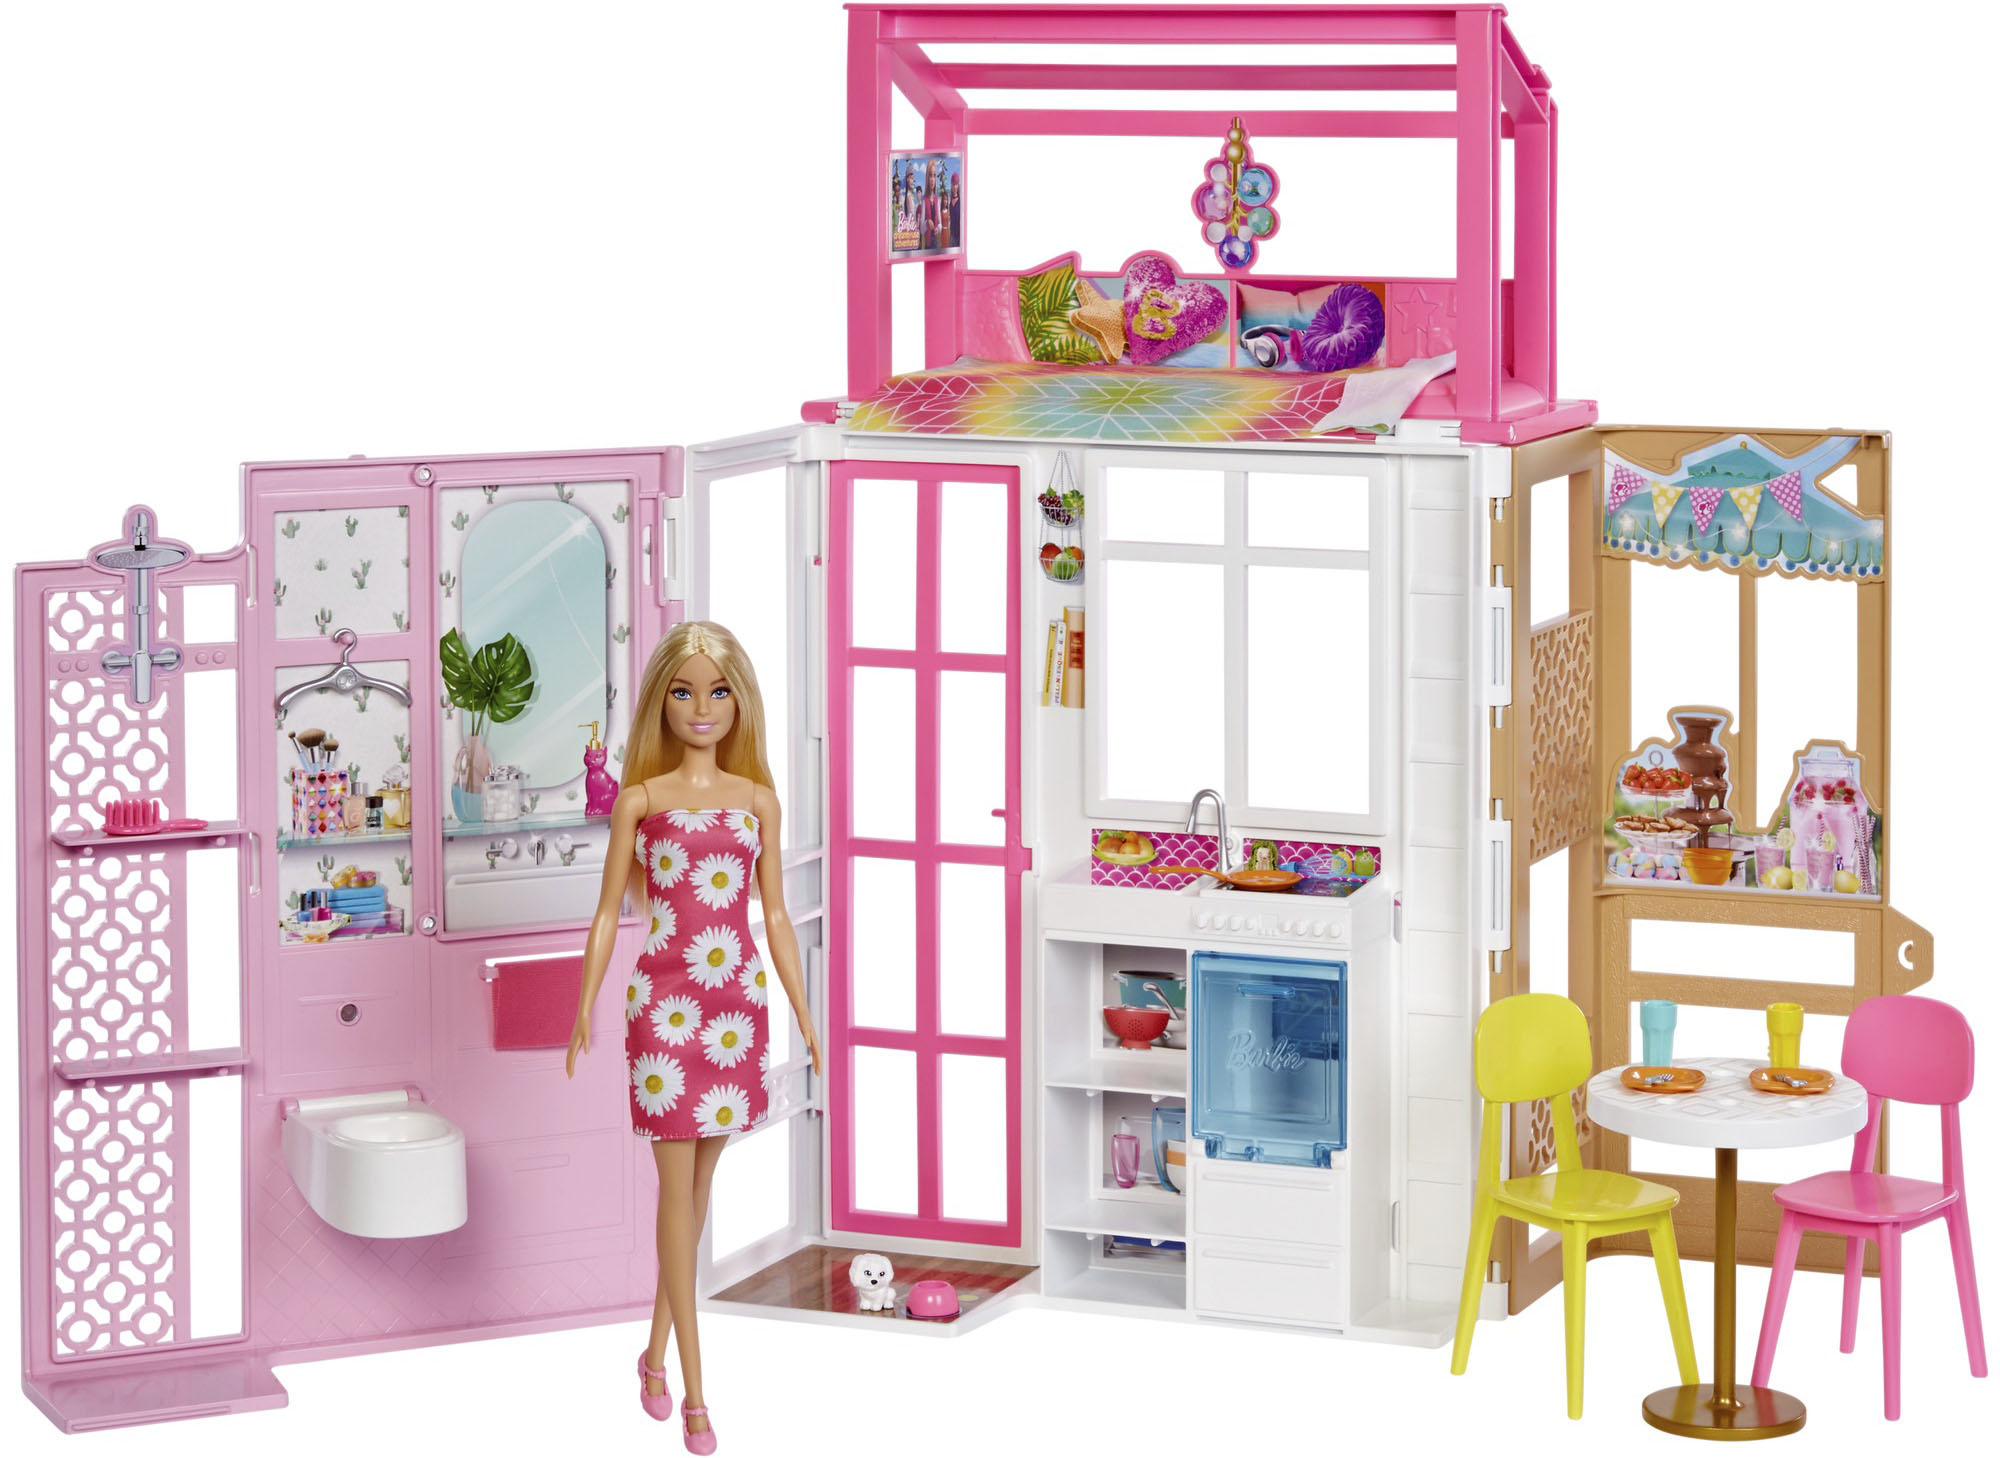 Barbie GBK10 Dream Closet with Accessories and Doll for sale online 